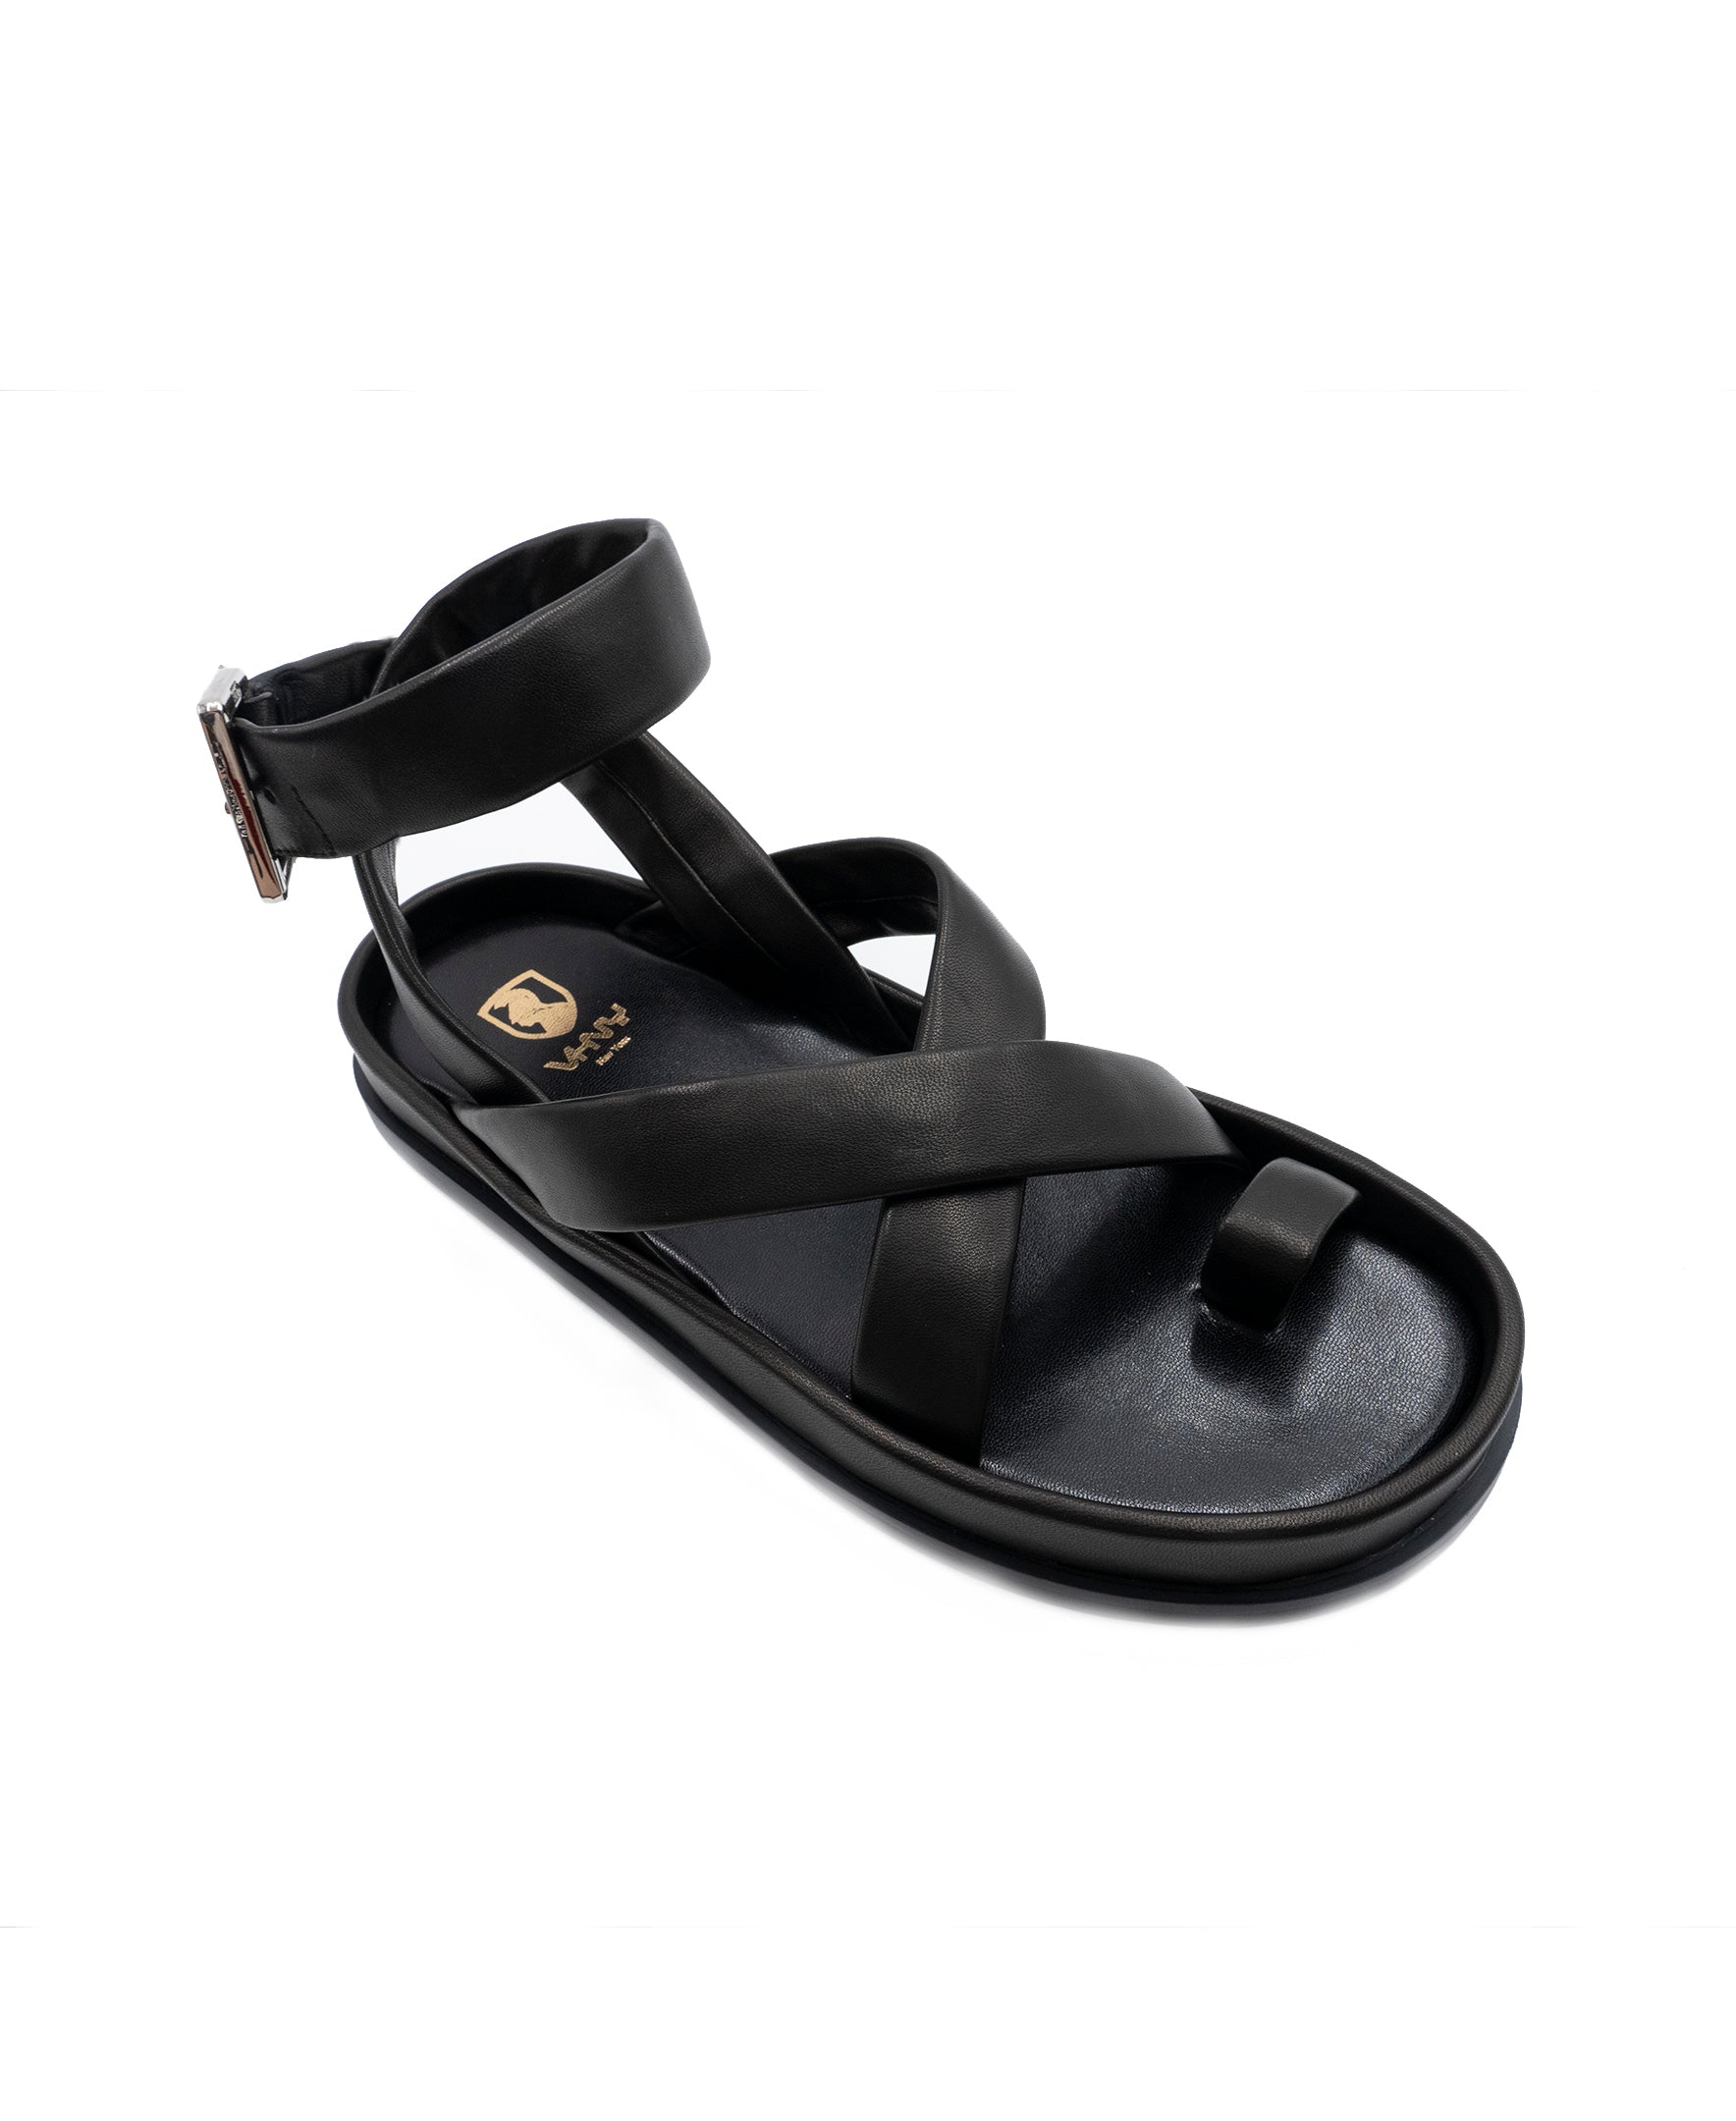 flat black sandals with ankle strap